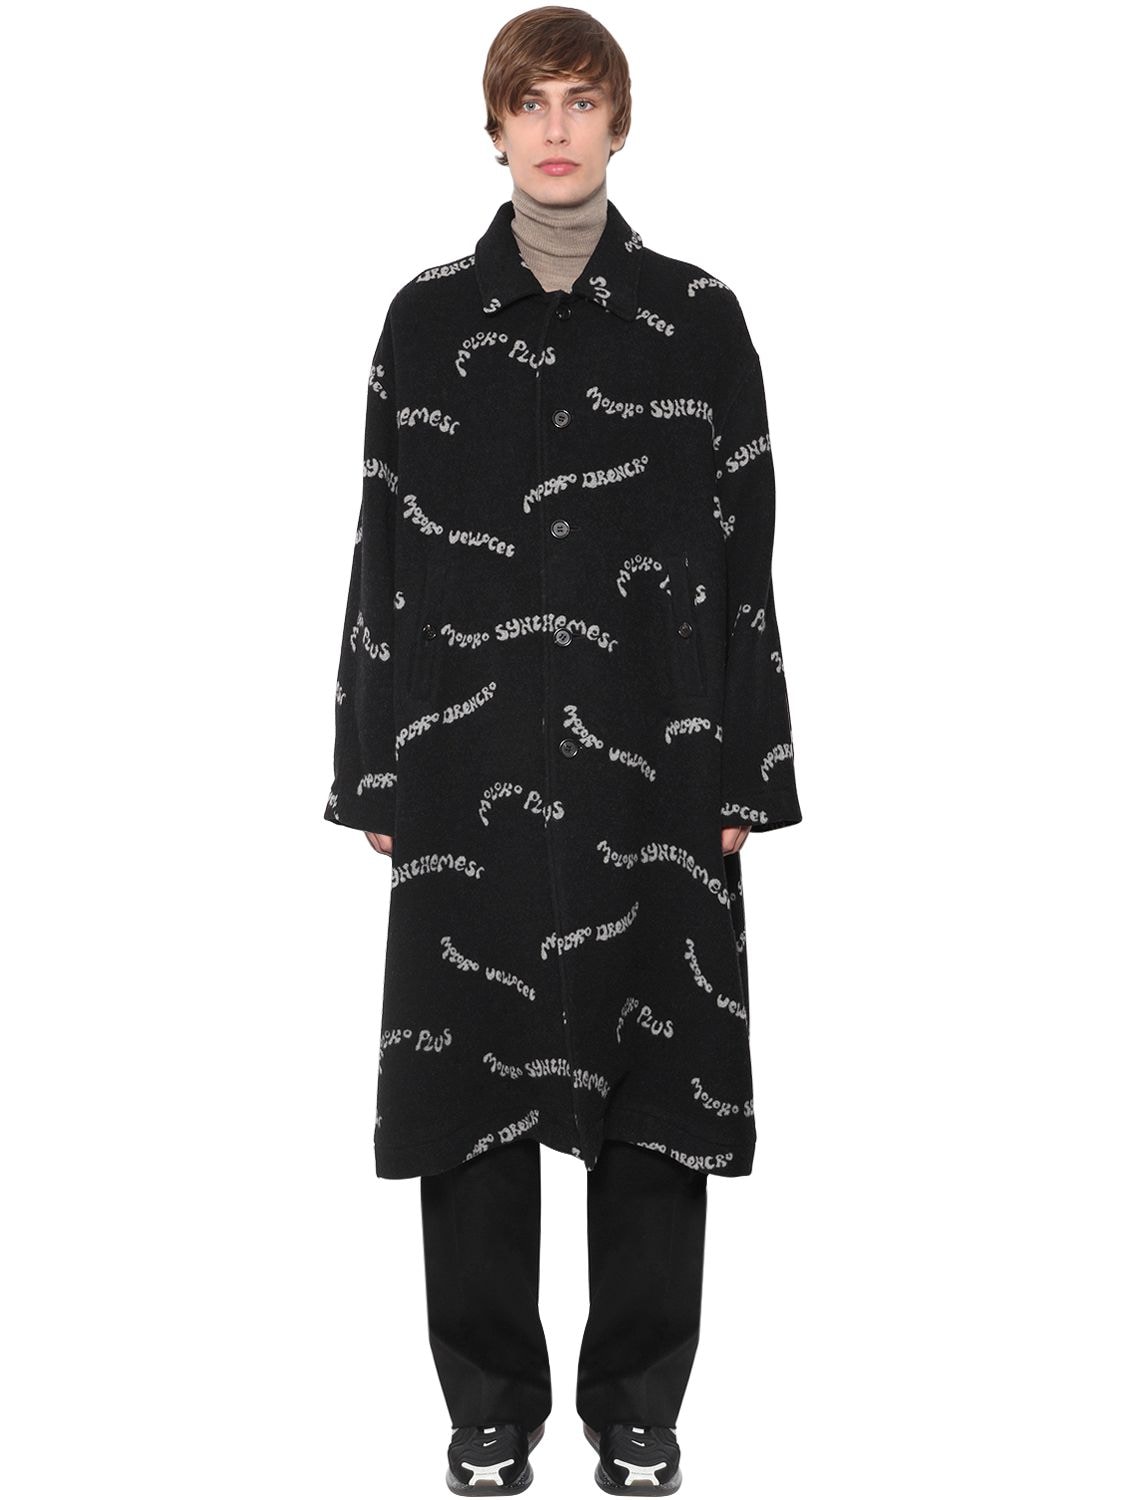 UNDERCOVER PRINTED WOOL & CASHMERE COAT,70IS3P003-QSBCTEFDSYBCQVNF0